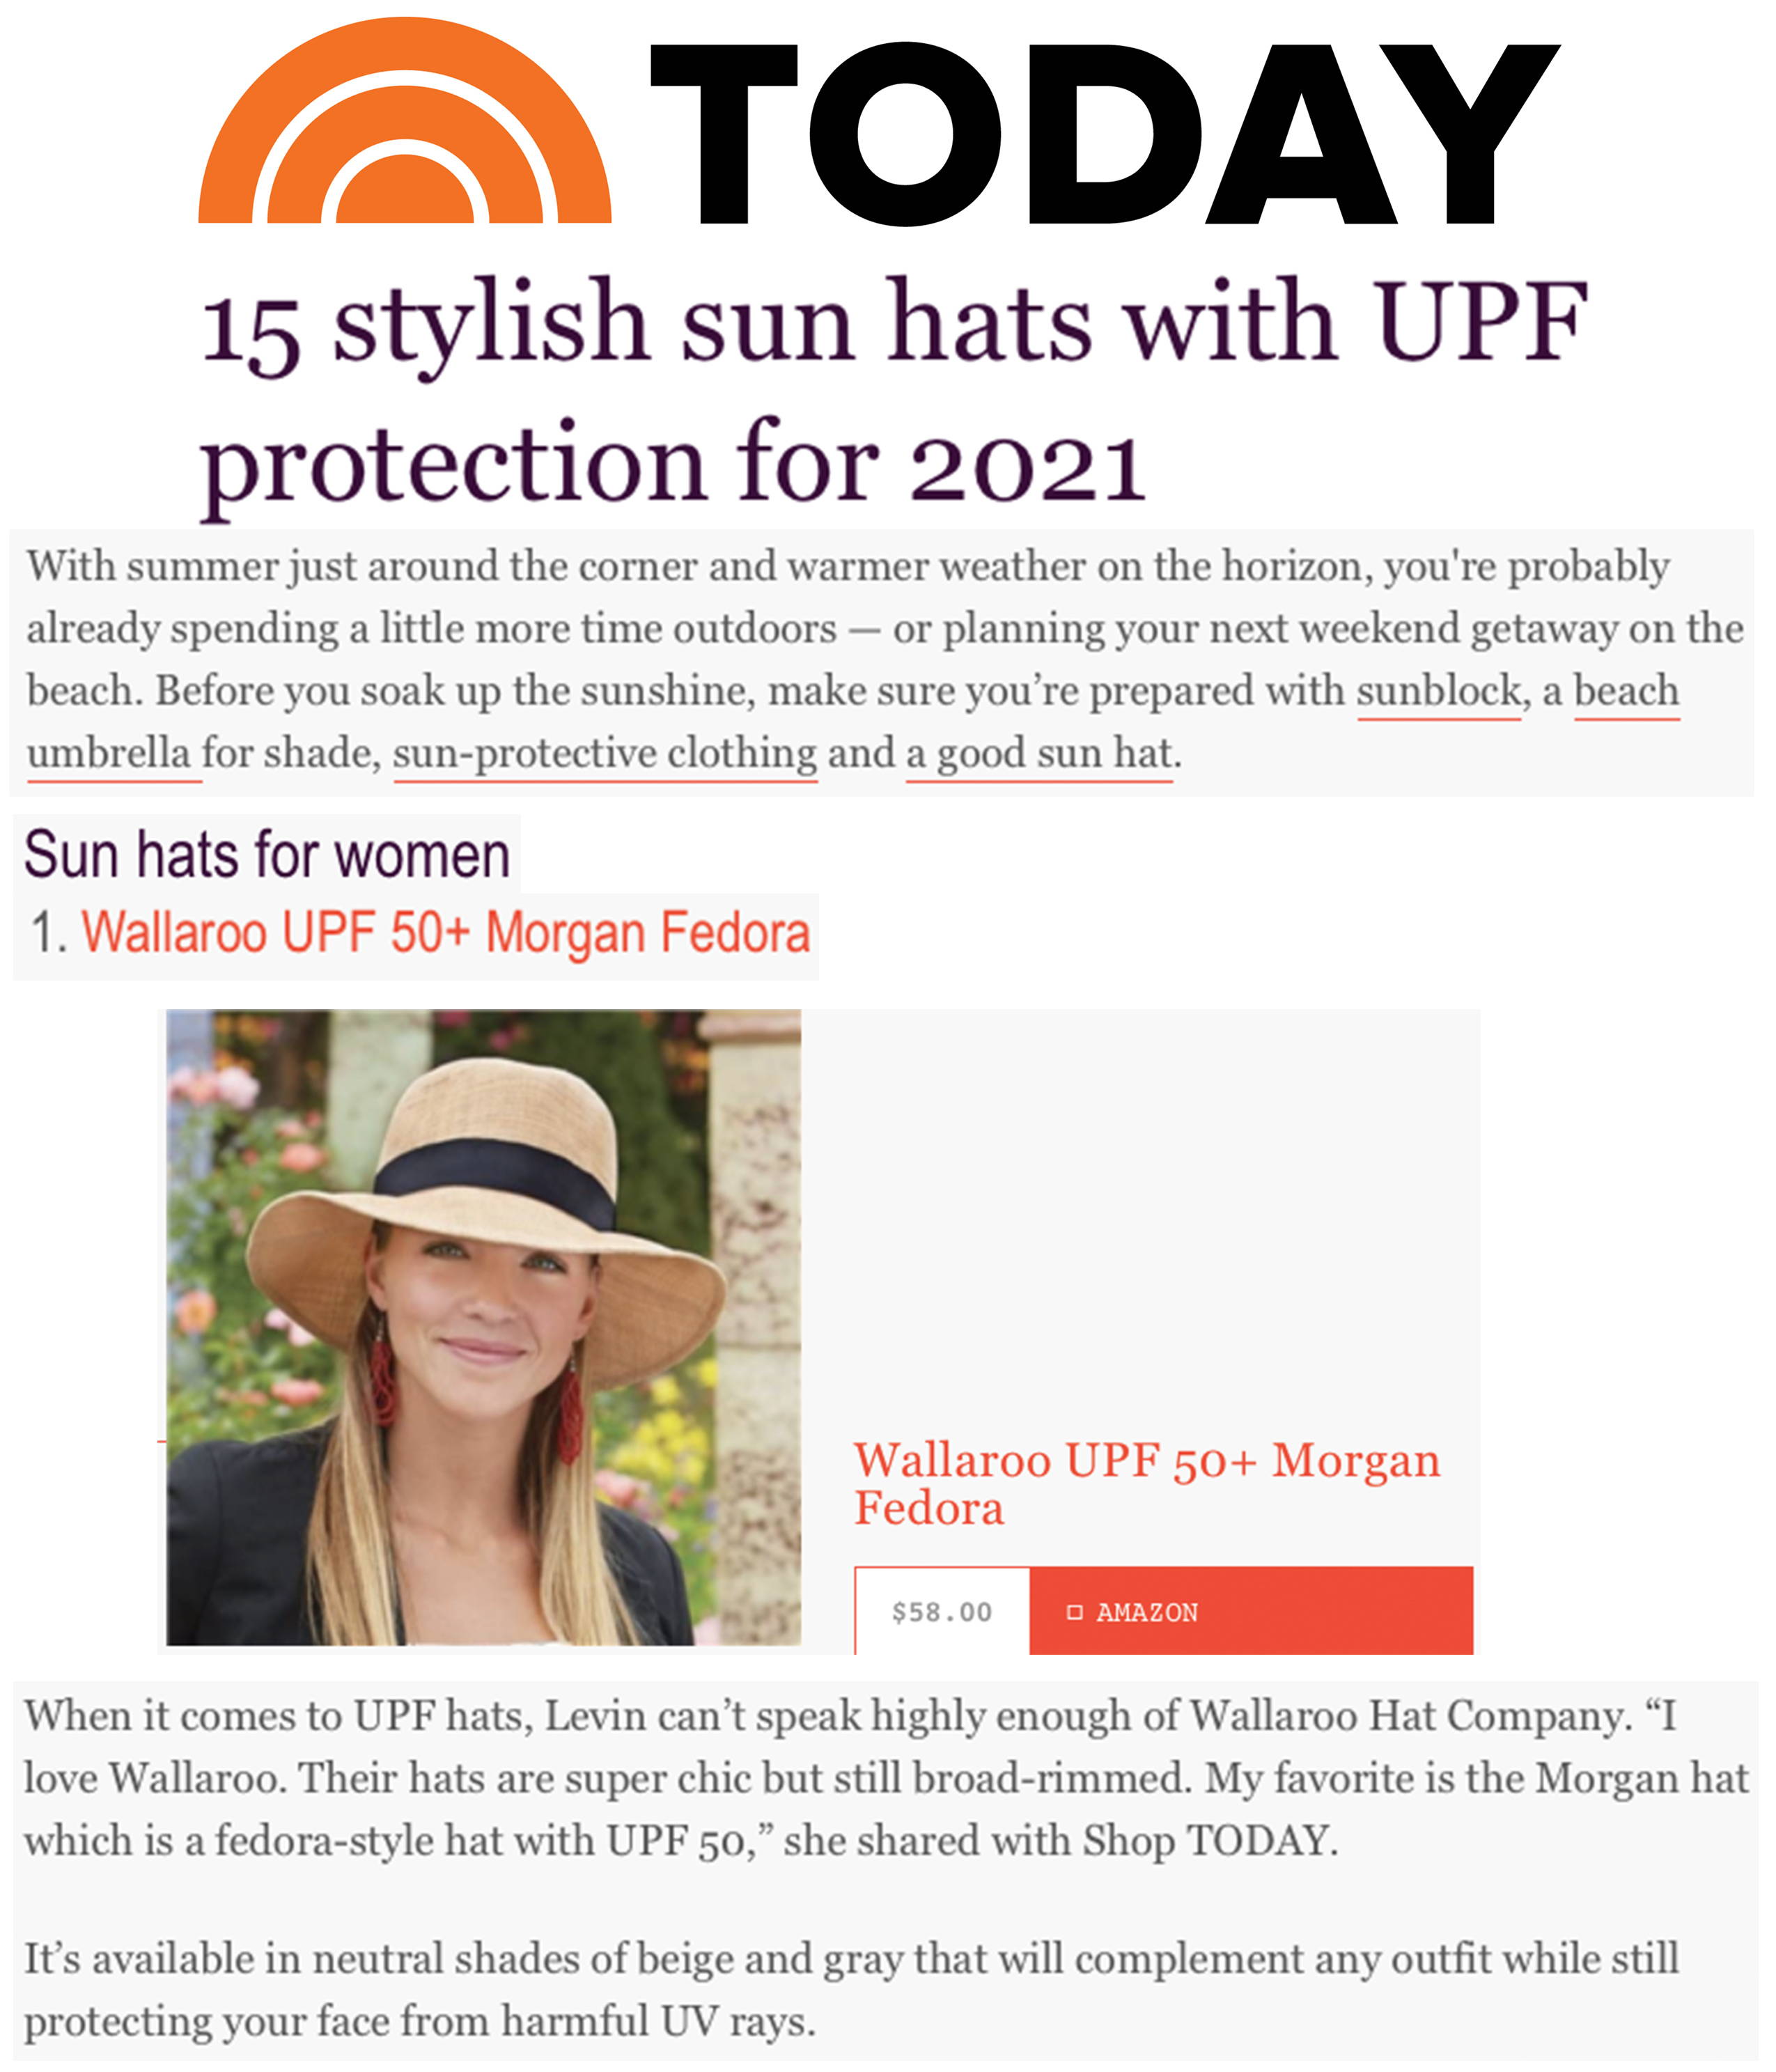 Wallaroo Featured on Today's Roundup of Sun Protection Hats